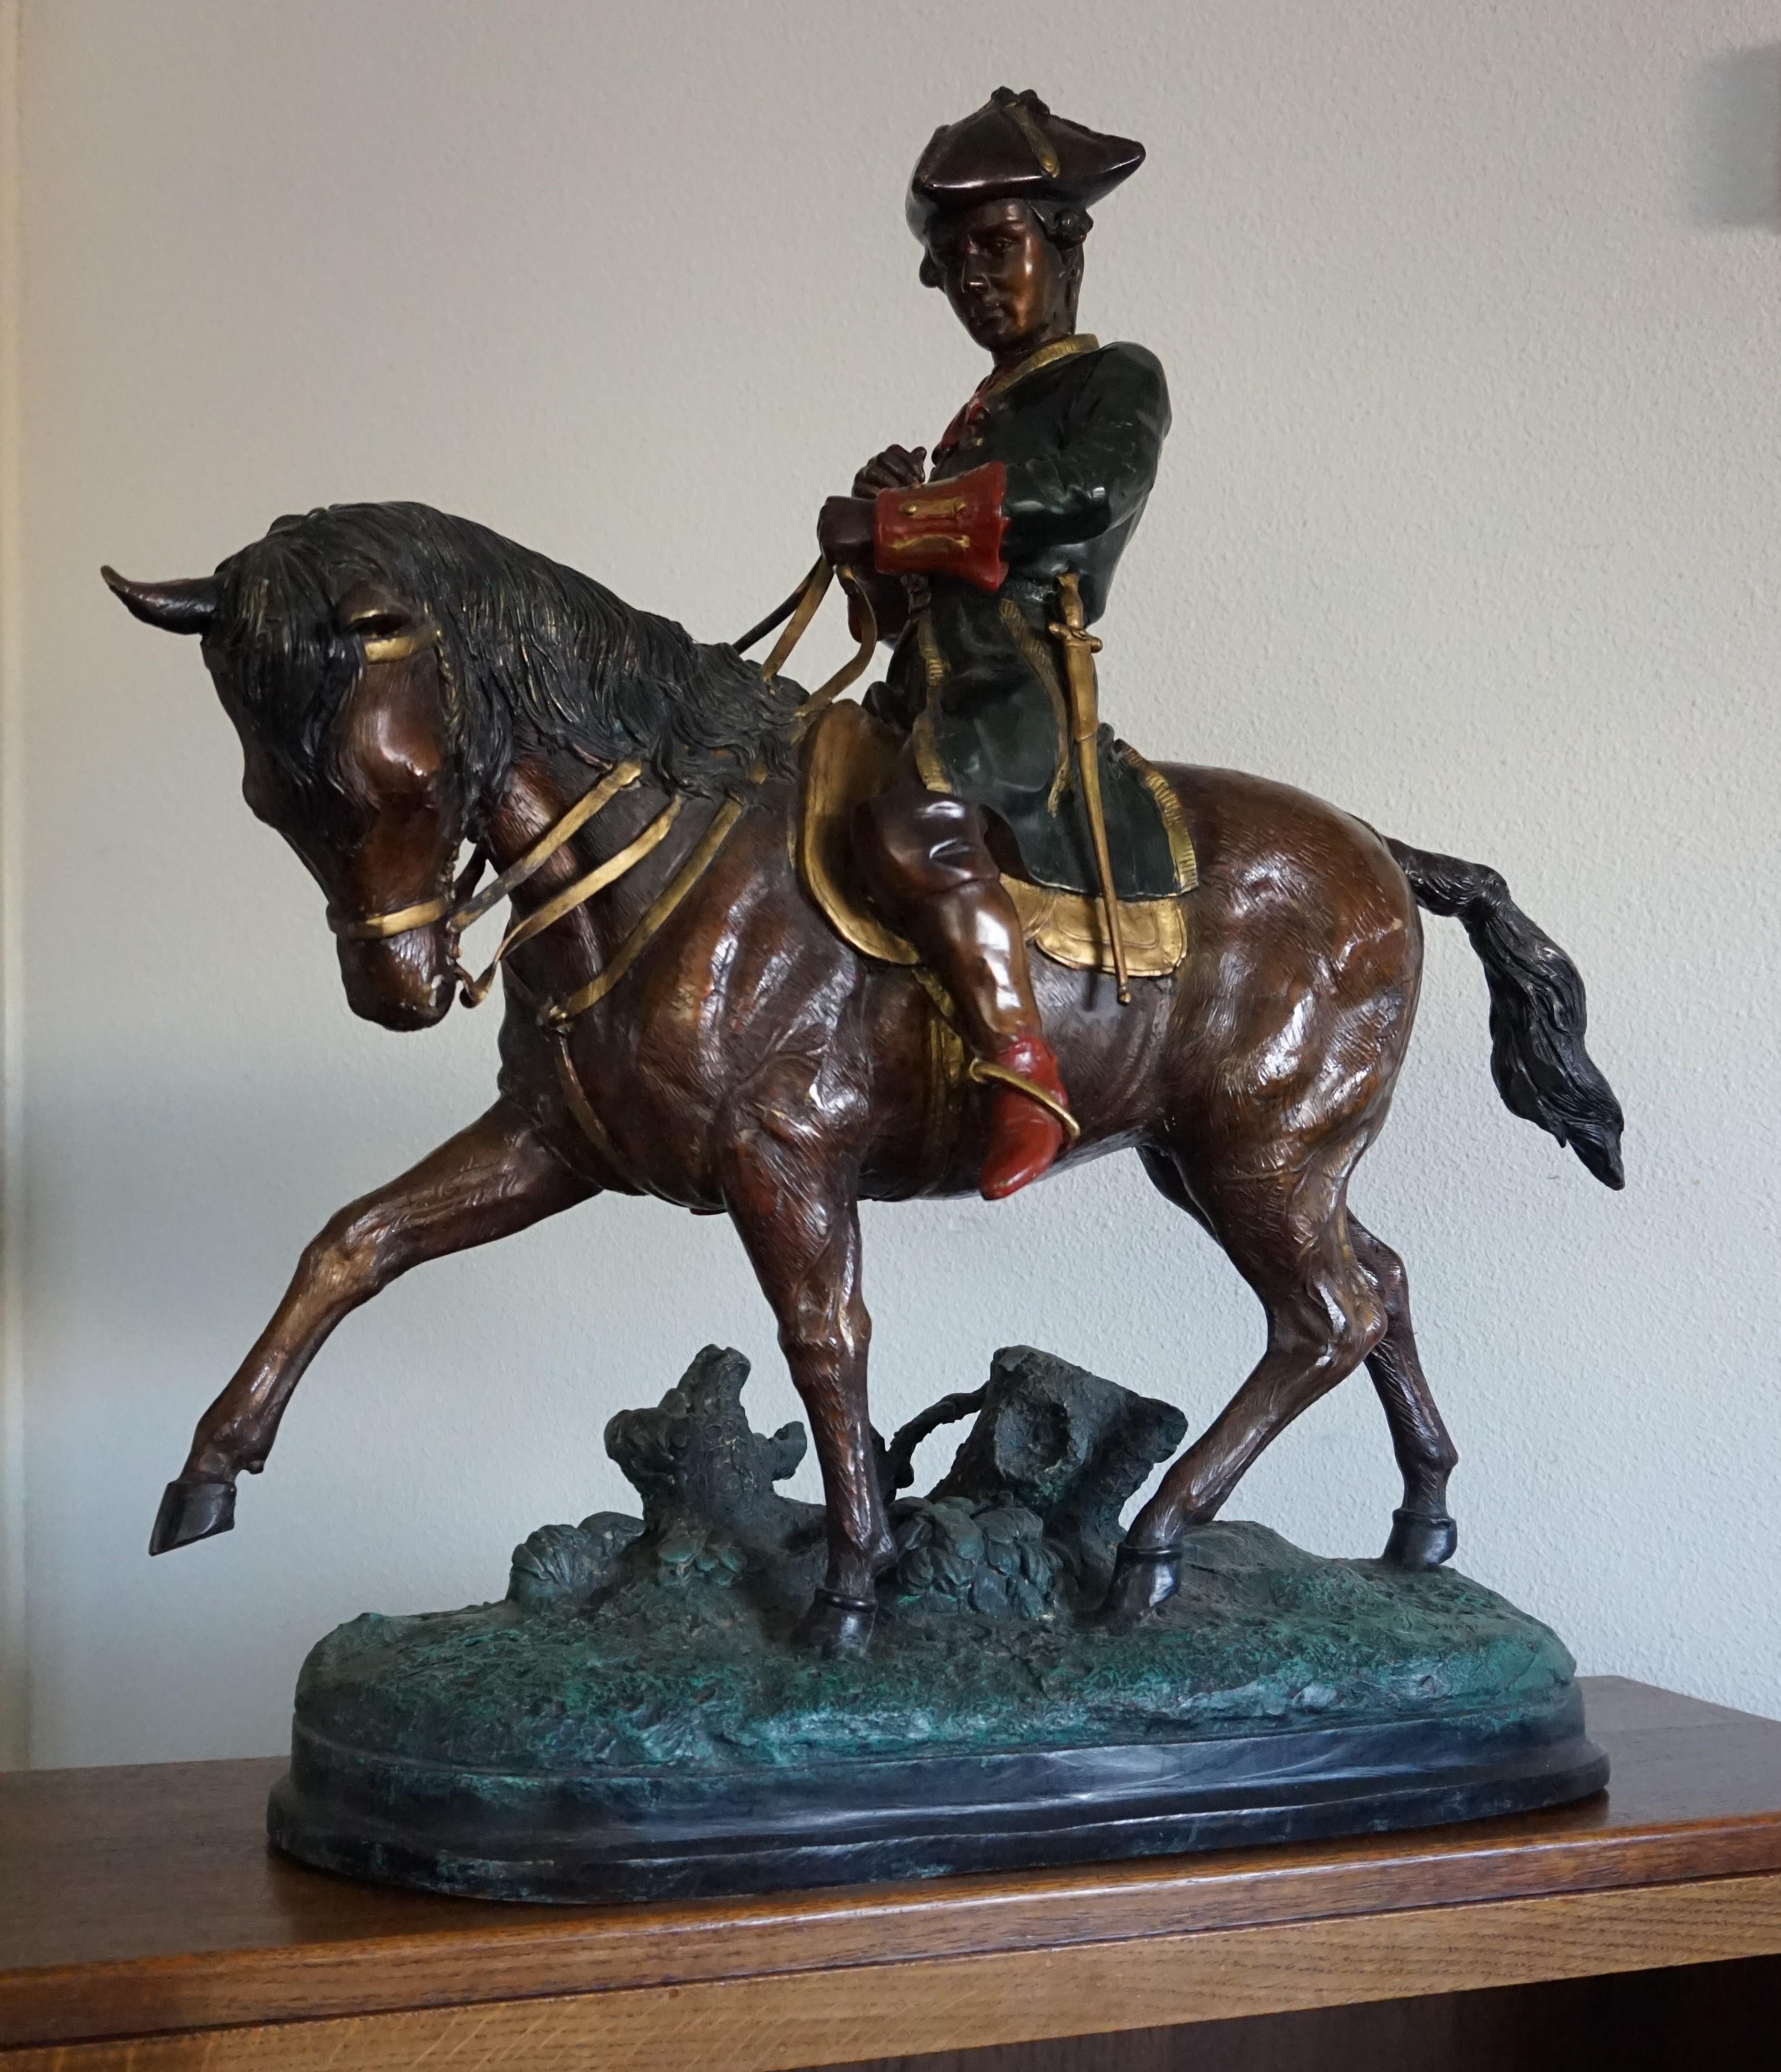 Impressive size and highly decorative, French bronze sculpture.

If you are looking for a work of art with both historical and decorative value then this large bronze sculpture could be perfect for you. Riding his marvelously sculpted horse is young